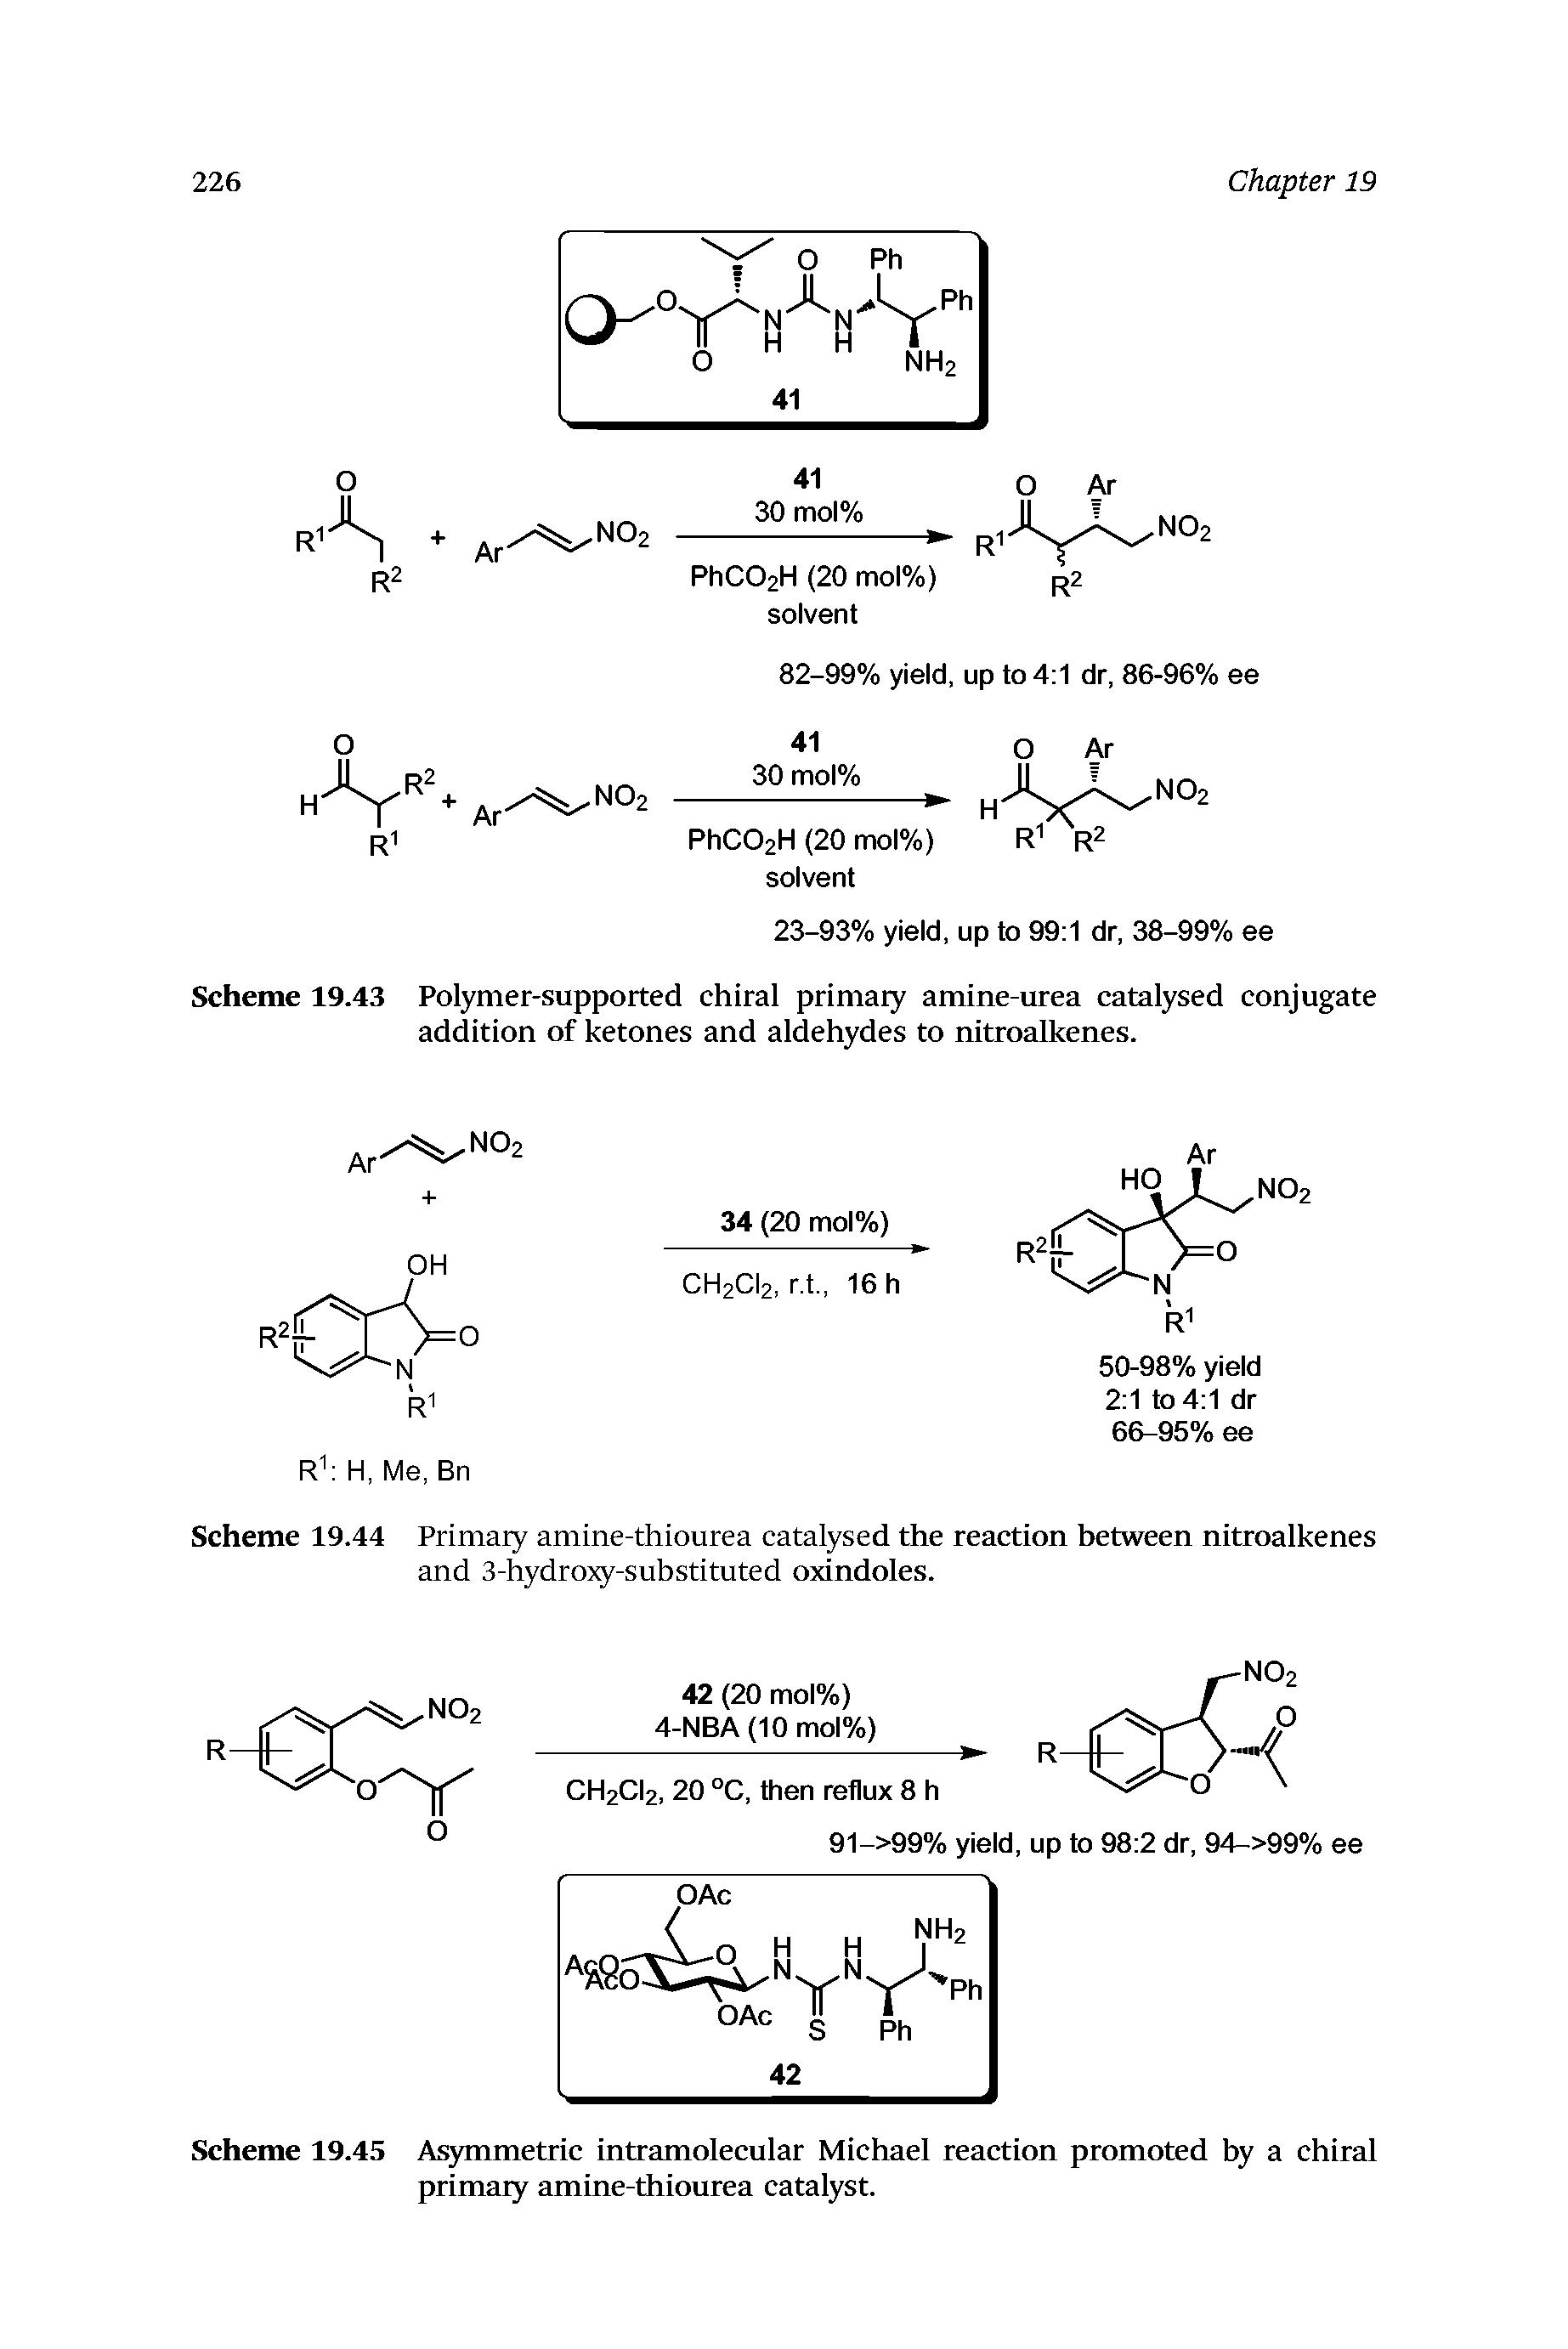 Scheme 19.43 Polymer-supported chiral primary amine-urea catalysed conjugate addition of ketones and aldehydes to nitroalkenes.